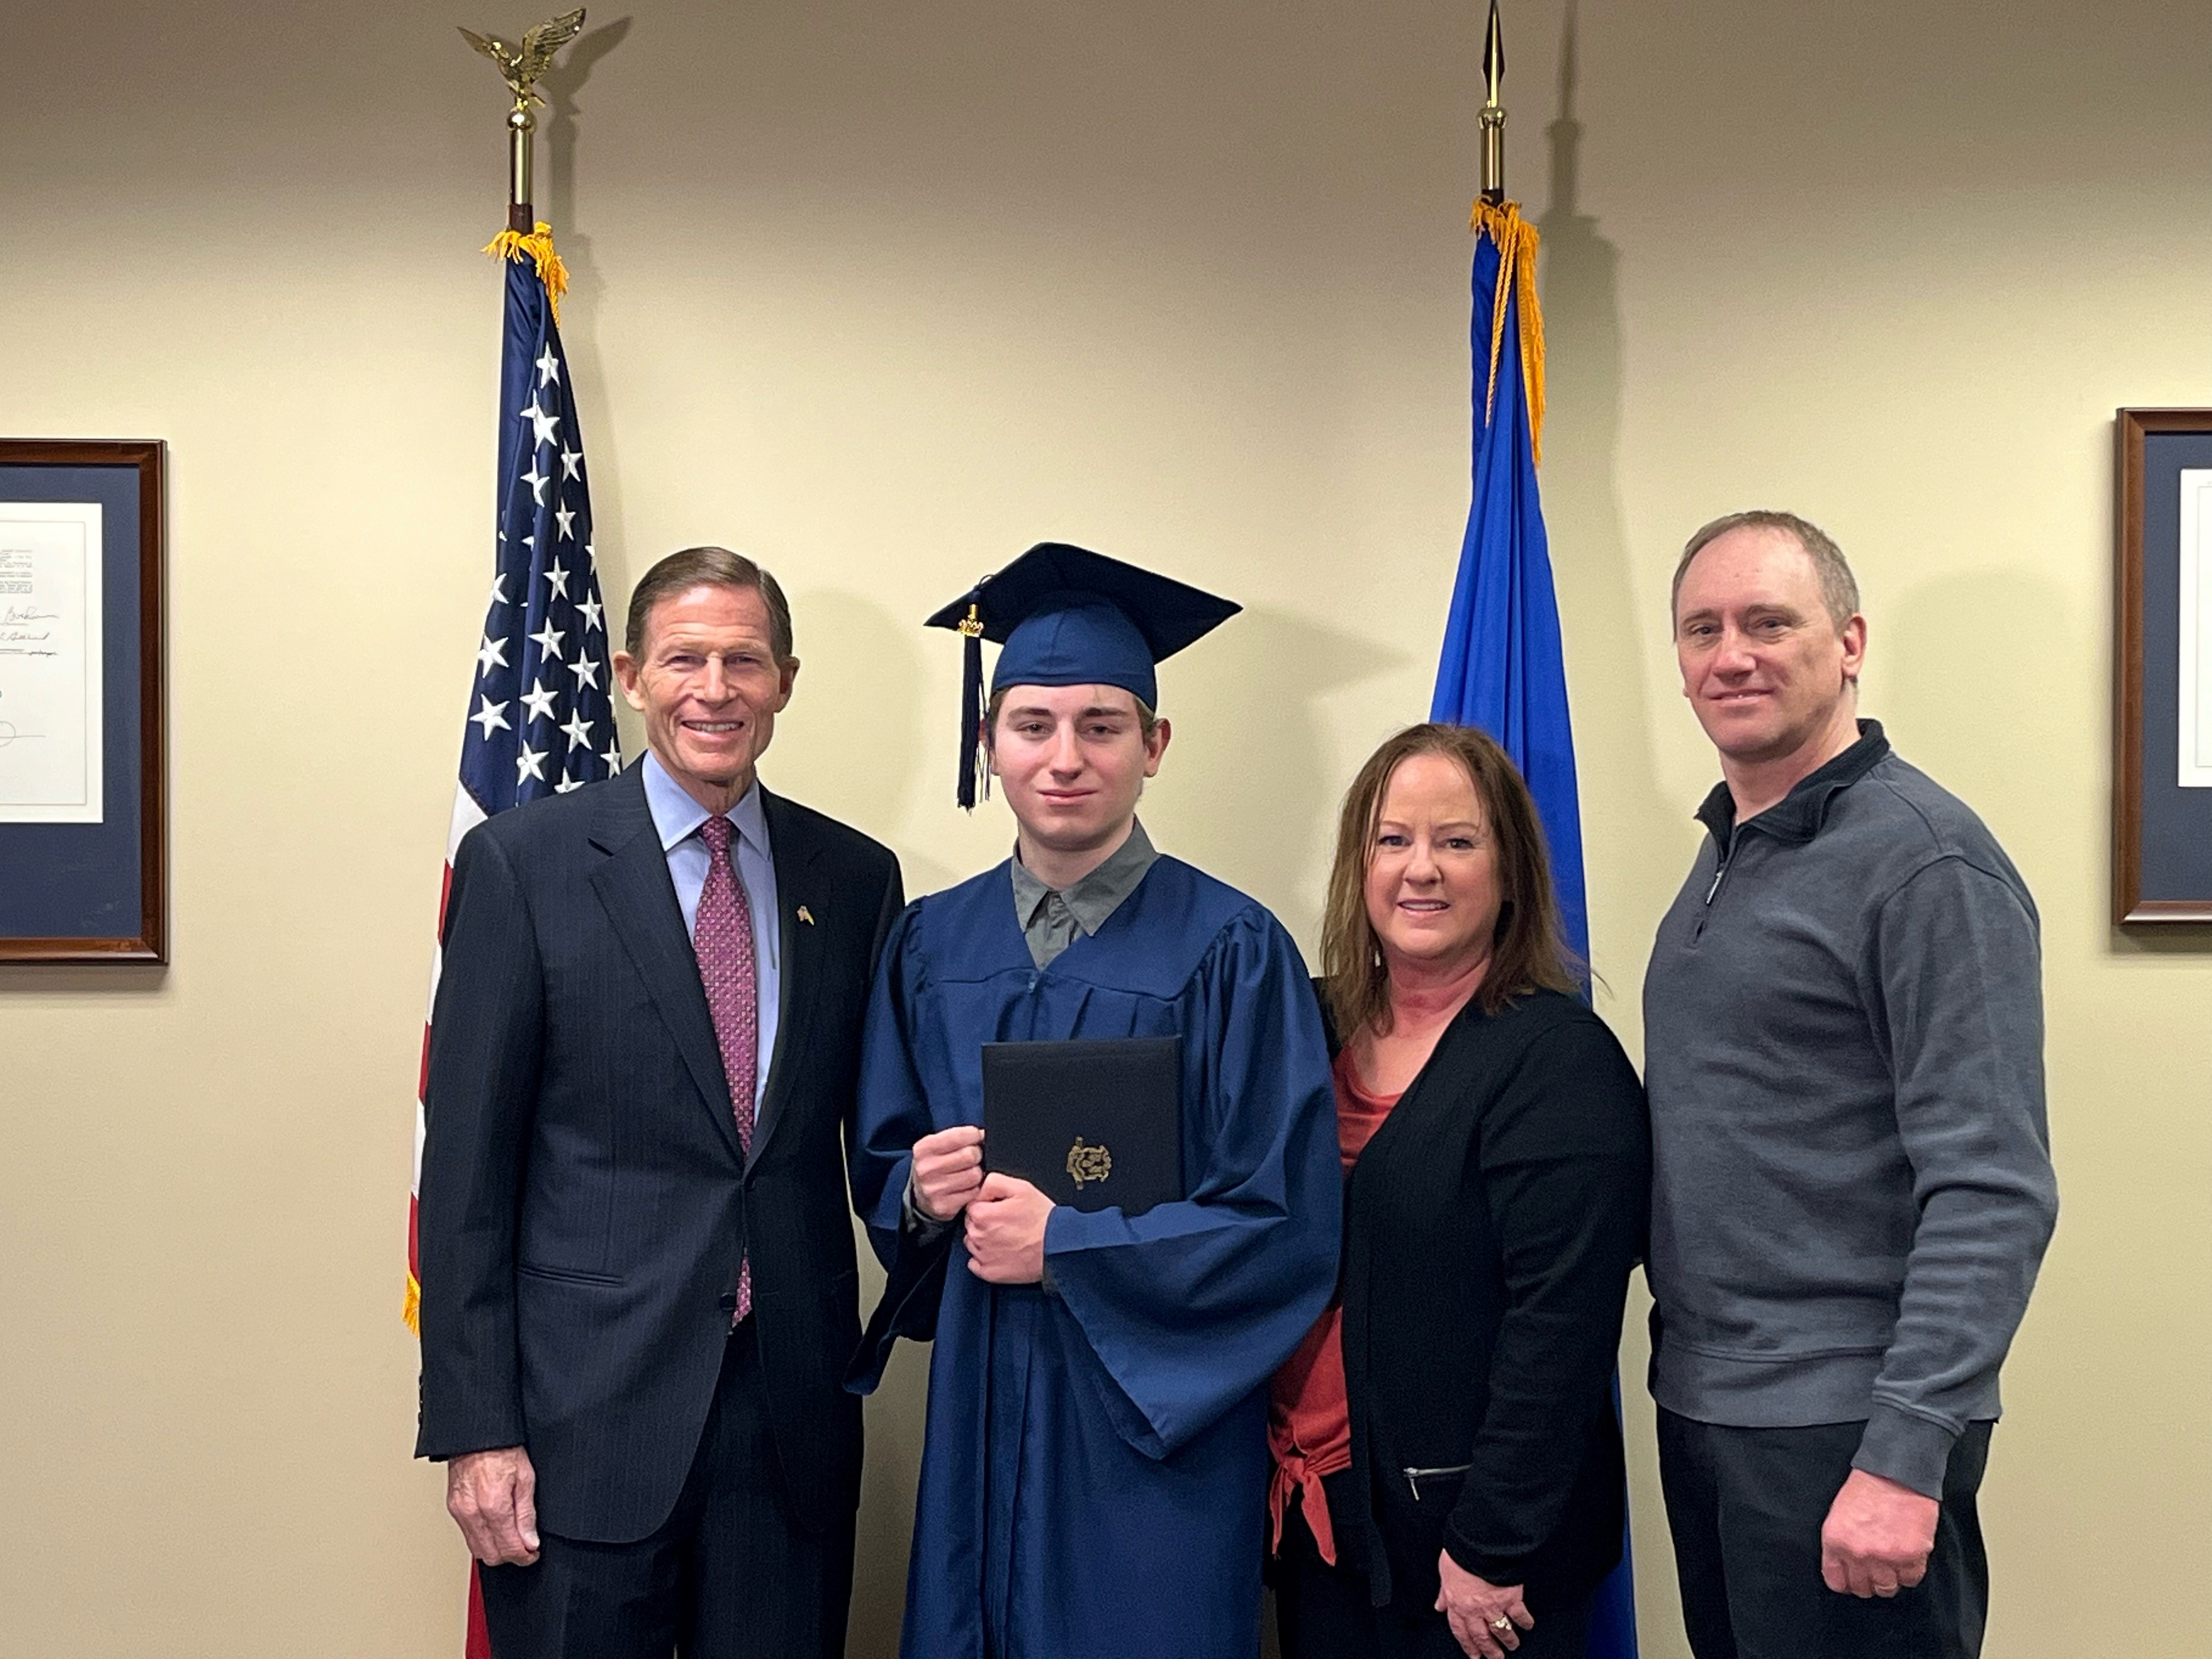 Blumenthal presented a high school diploma to Christian Kosovic, a childhood Leukemia survivor, 10 years after helping his family during a shortage of the lifesaving chemotherapy drug methotrexate. 